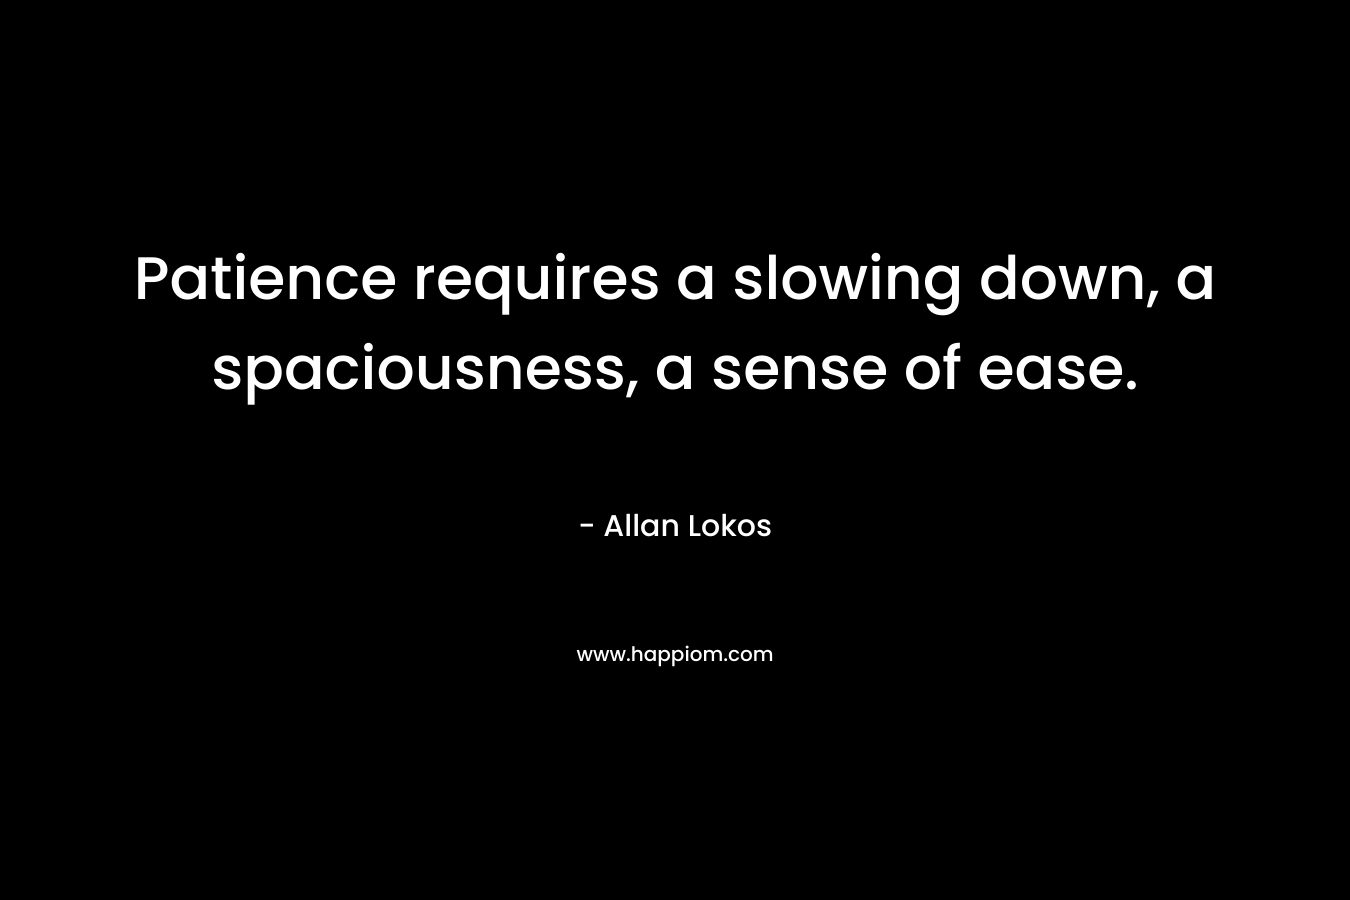 Patience requires a slowing down, a spaciousness, a sense of ease.